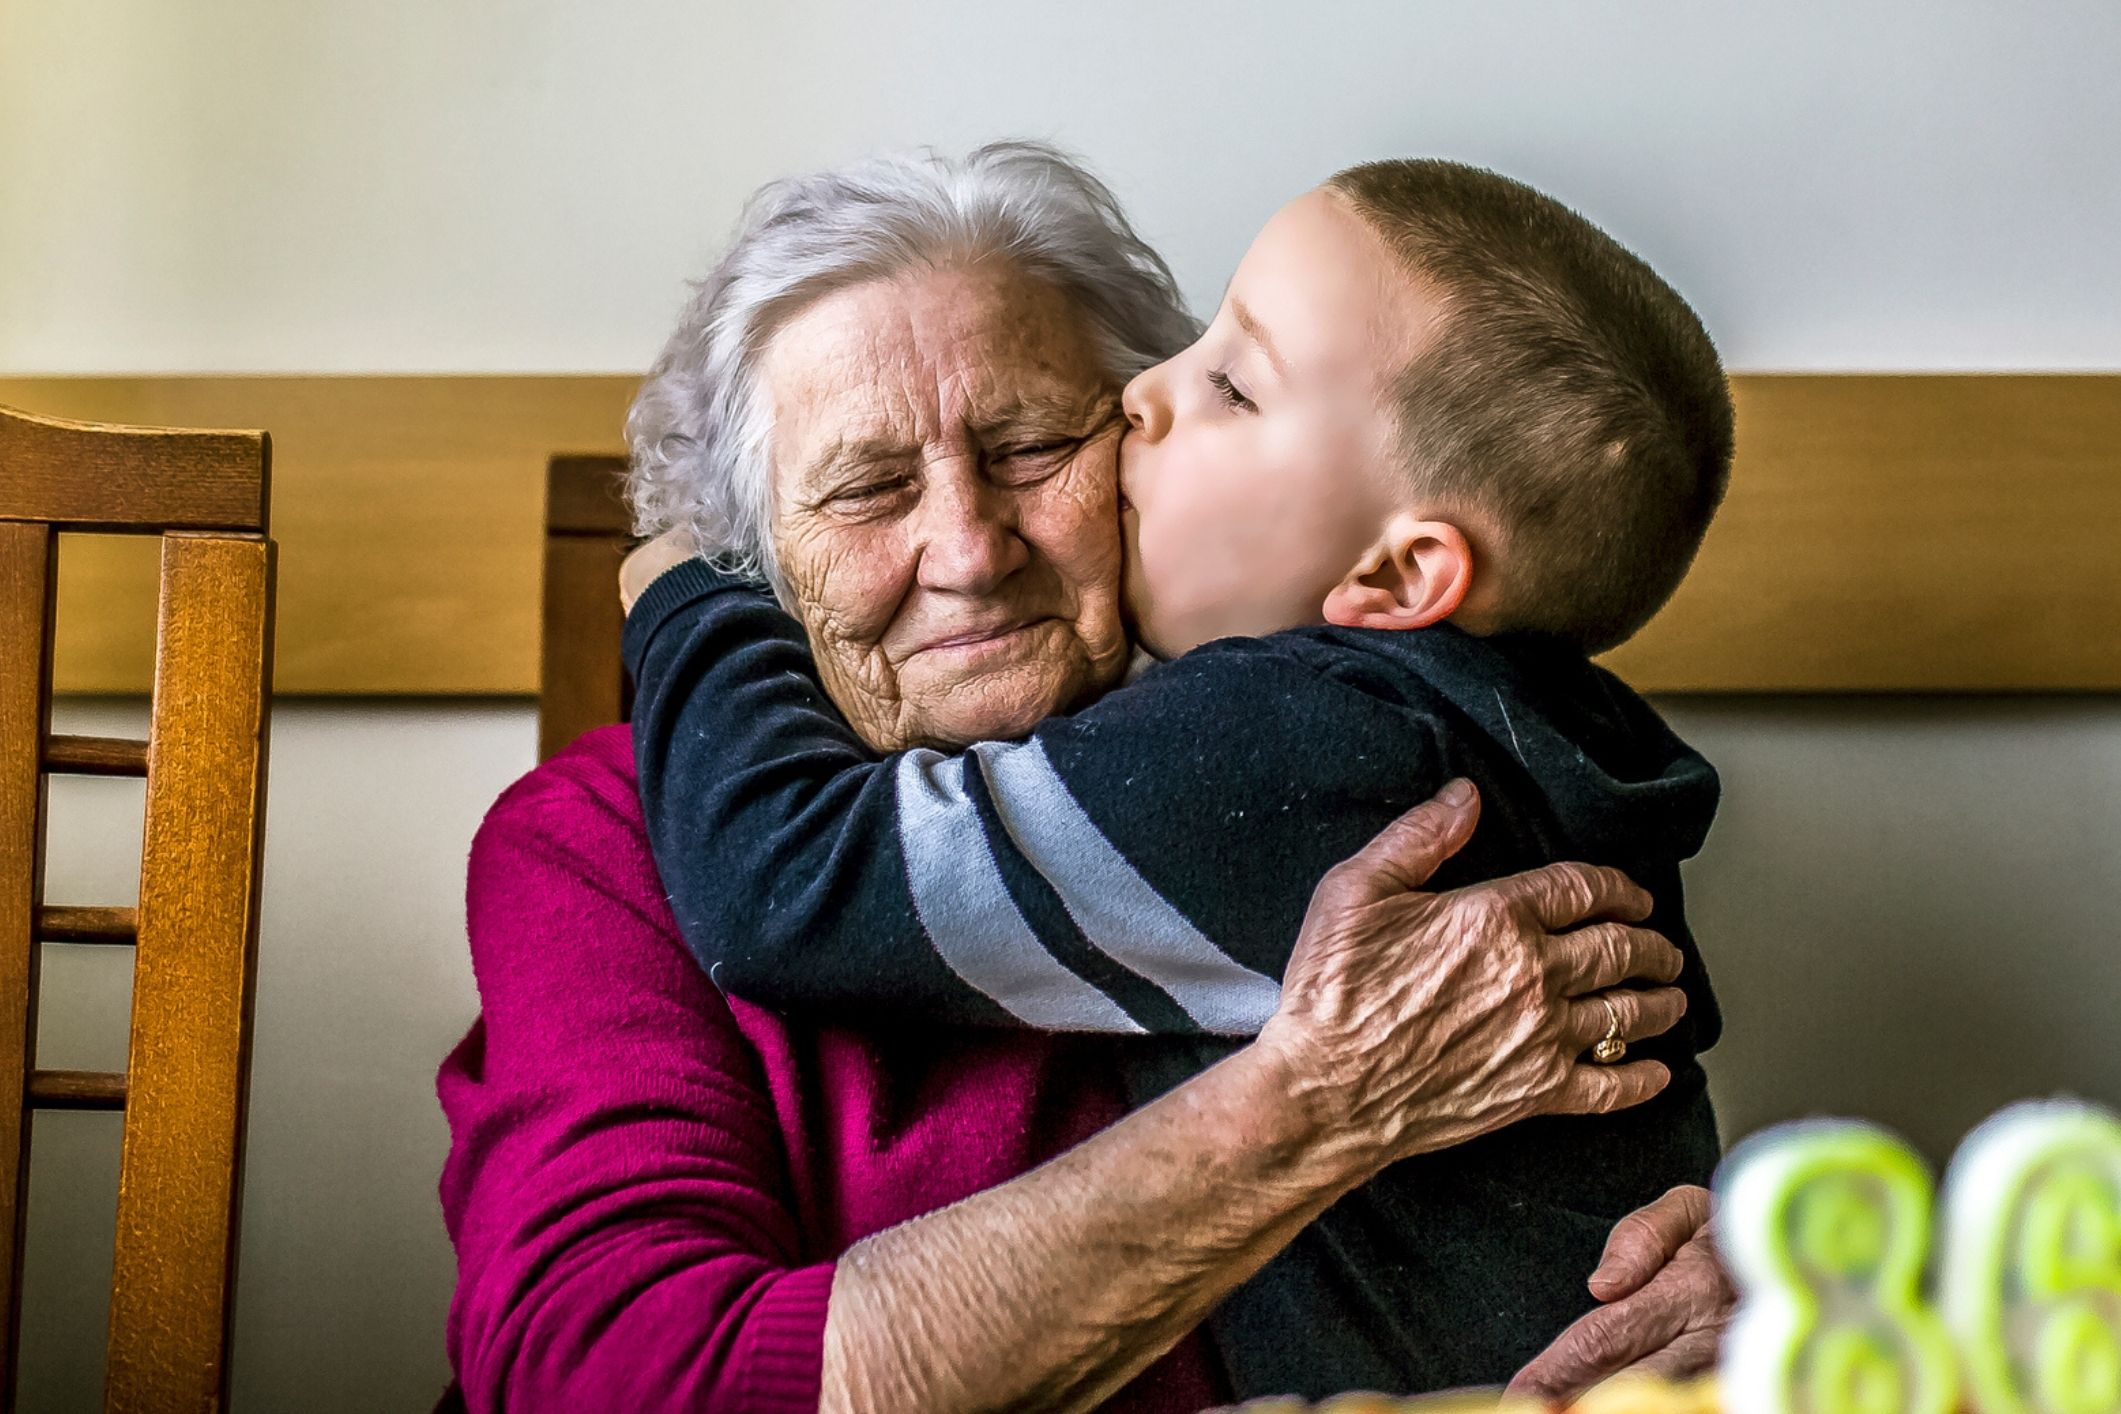 Science shows how grandmothers’ brains respond to seeing their grandchildren